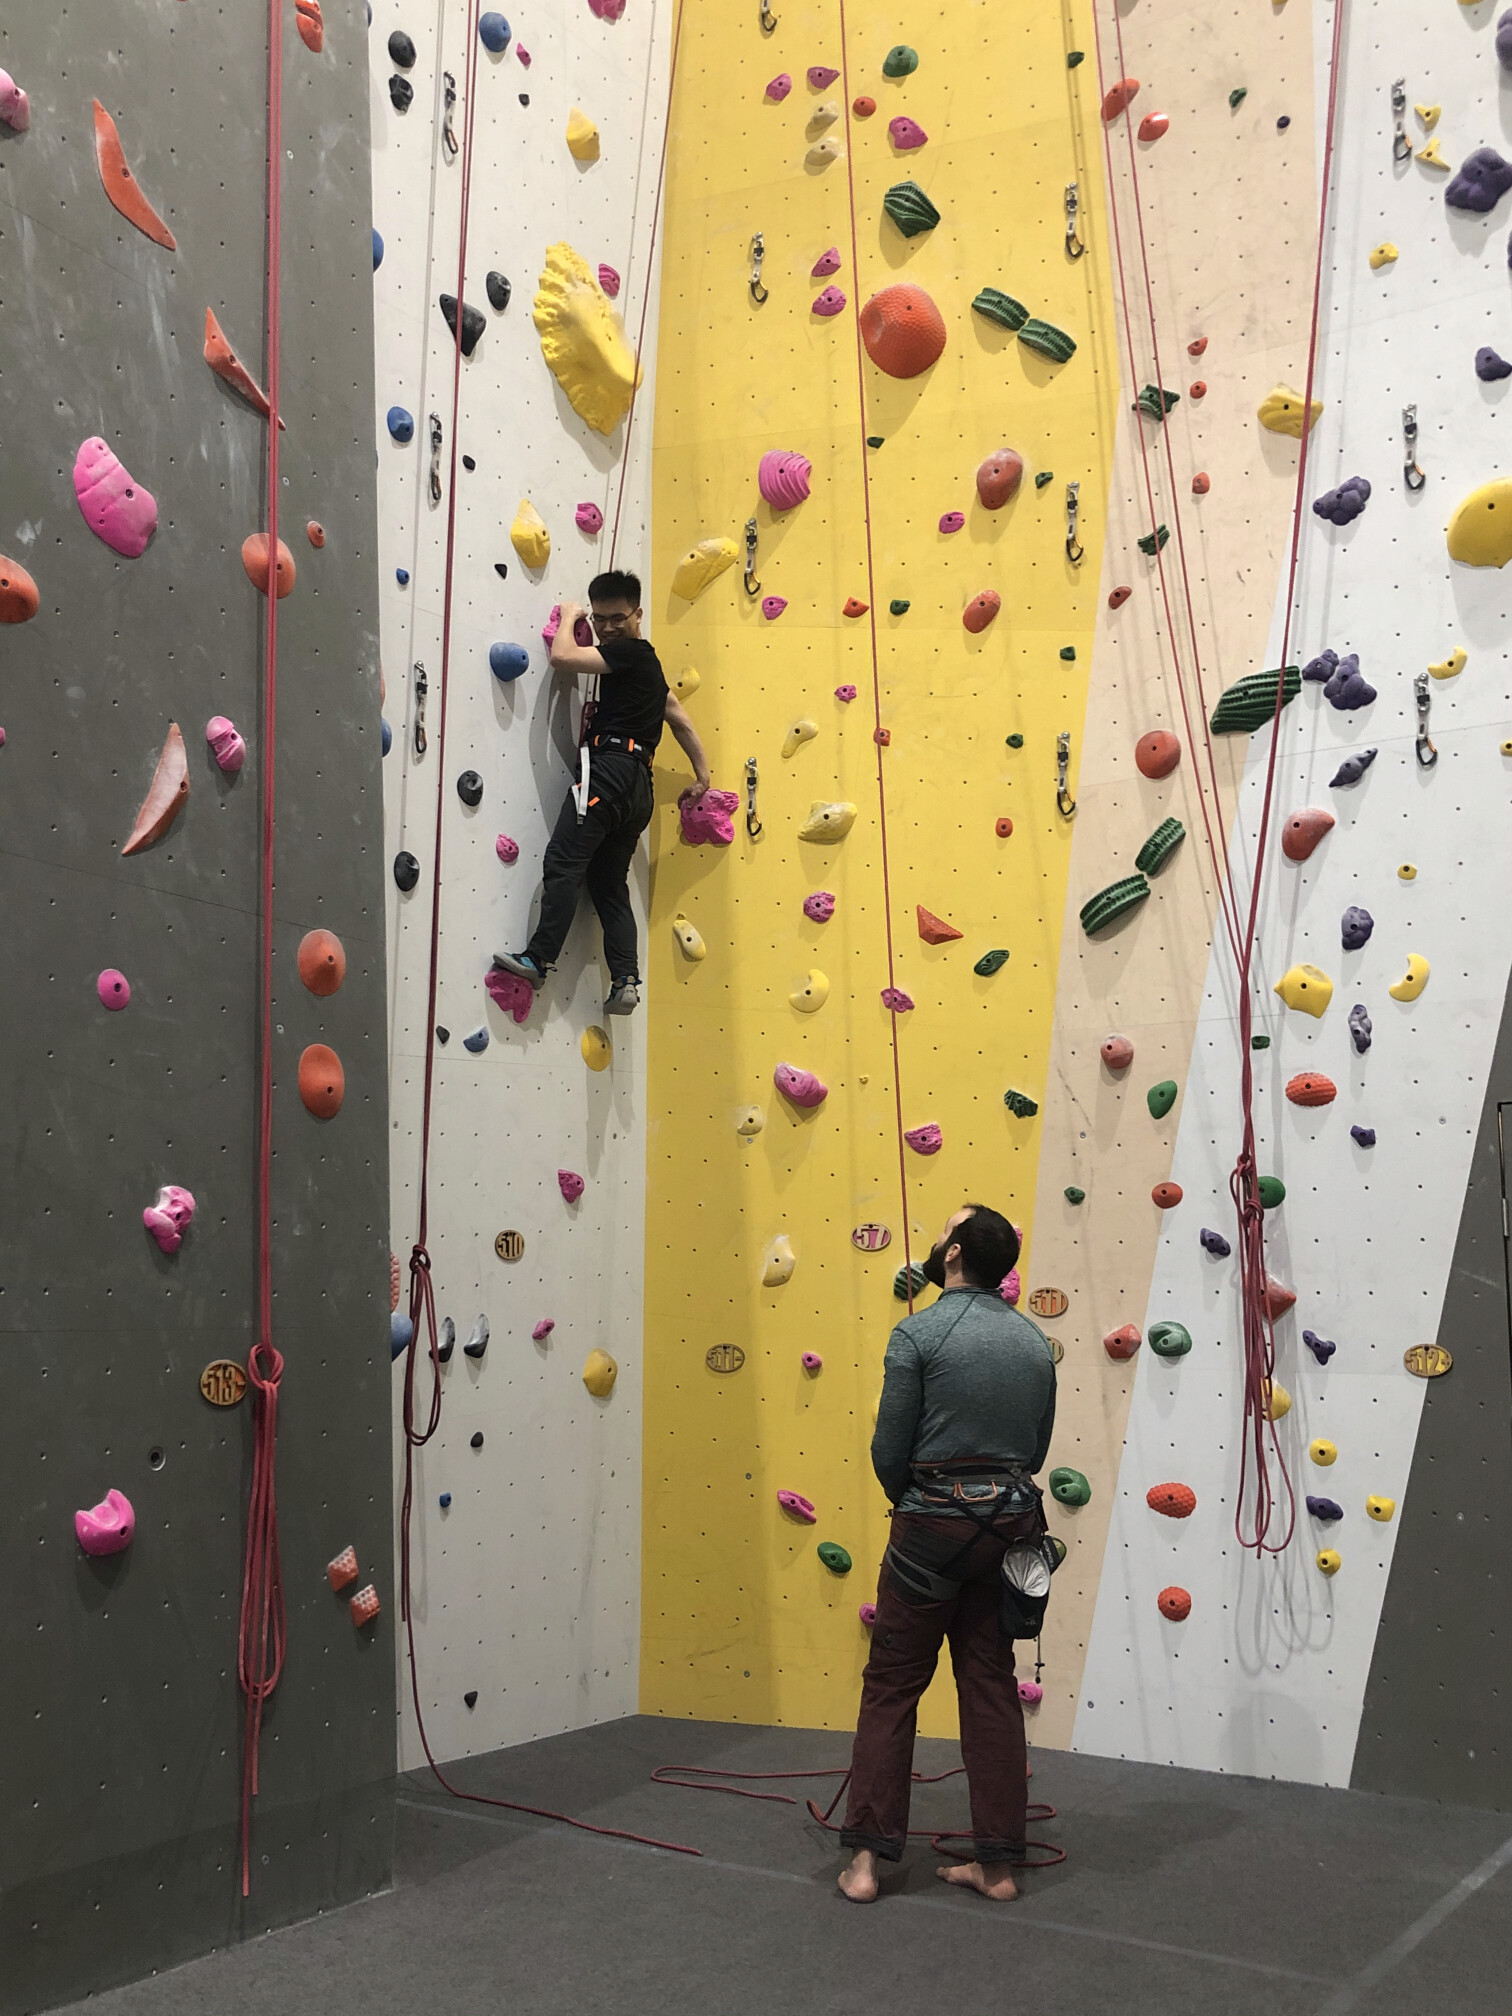 The group went climbing with the Crespo group in December 2019